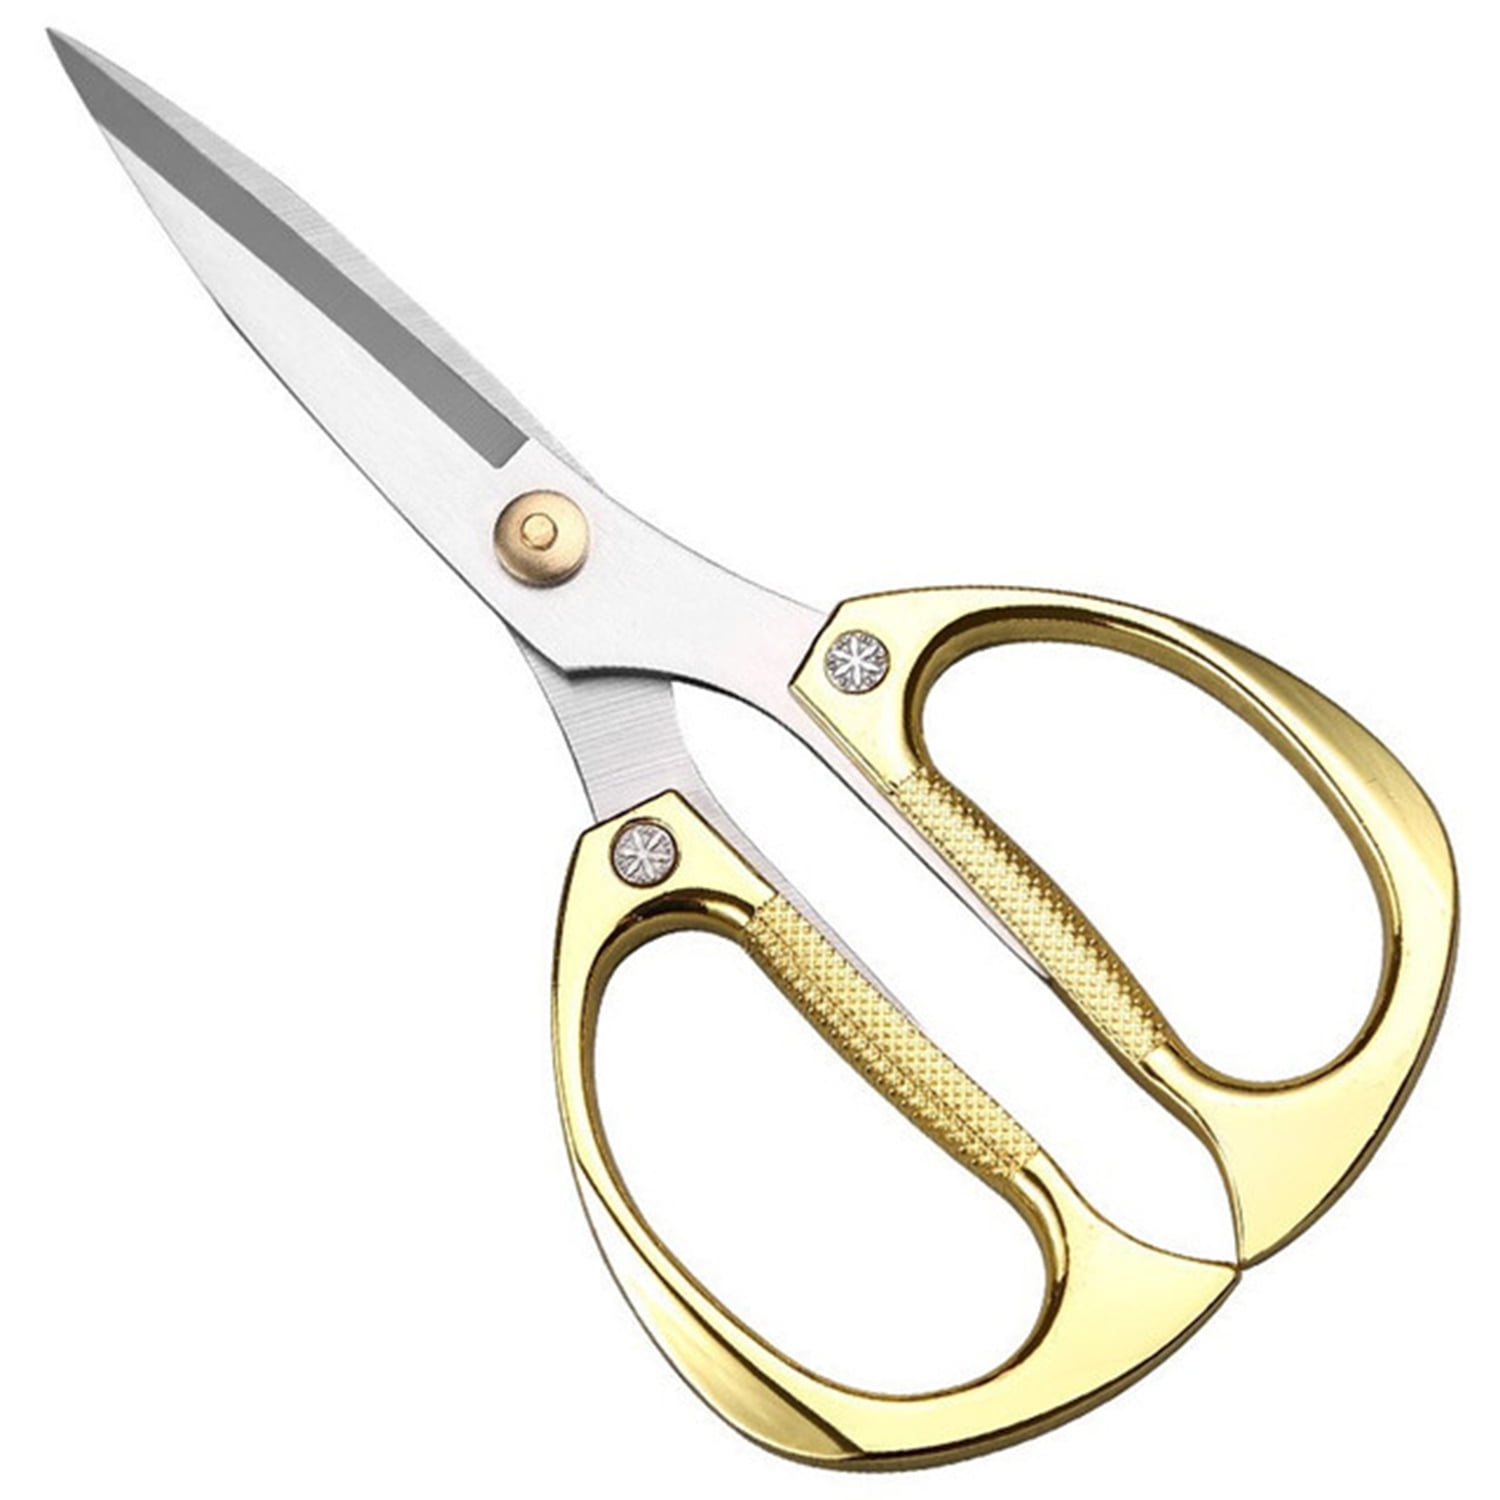 Buy Henny All Purpose Scissors Online at Best Prices in India